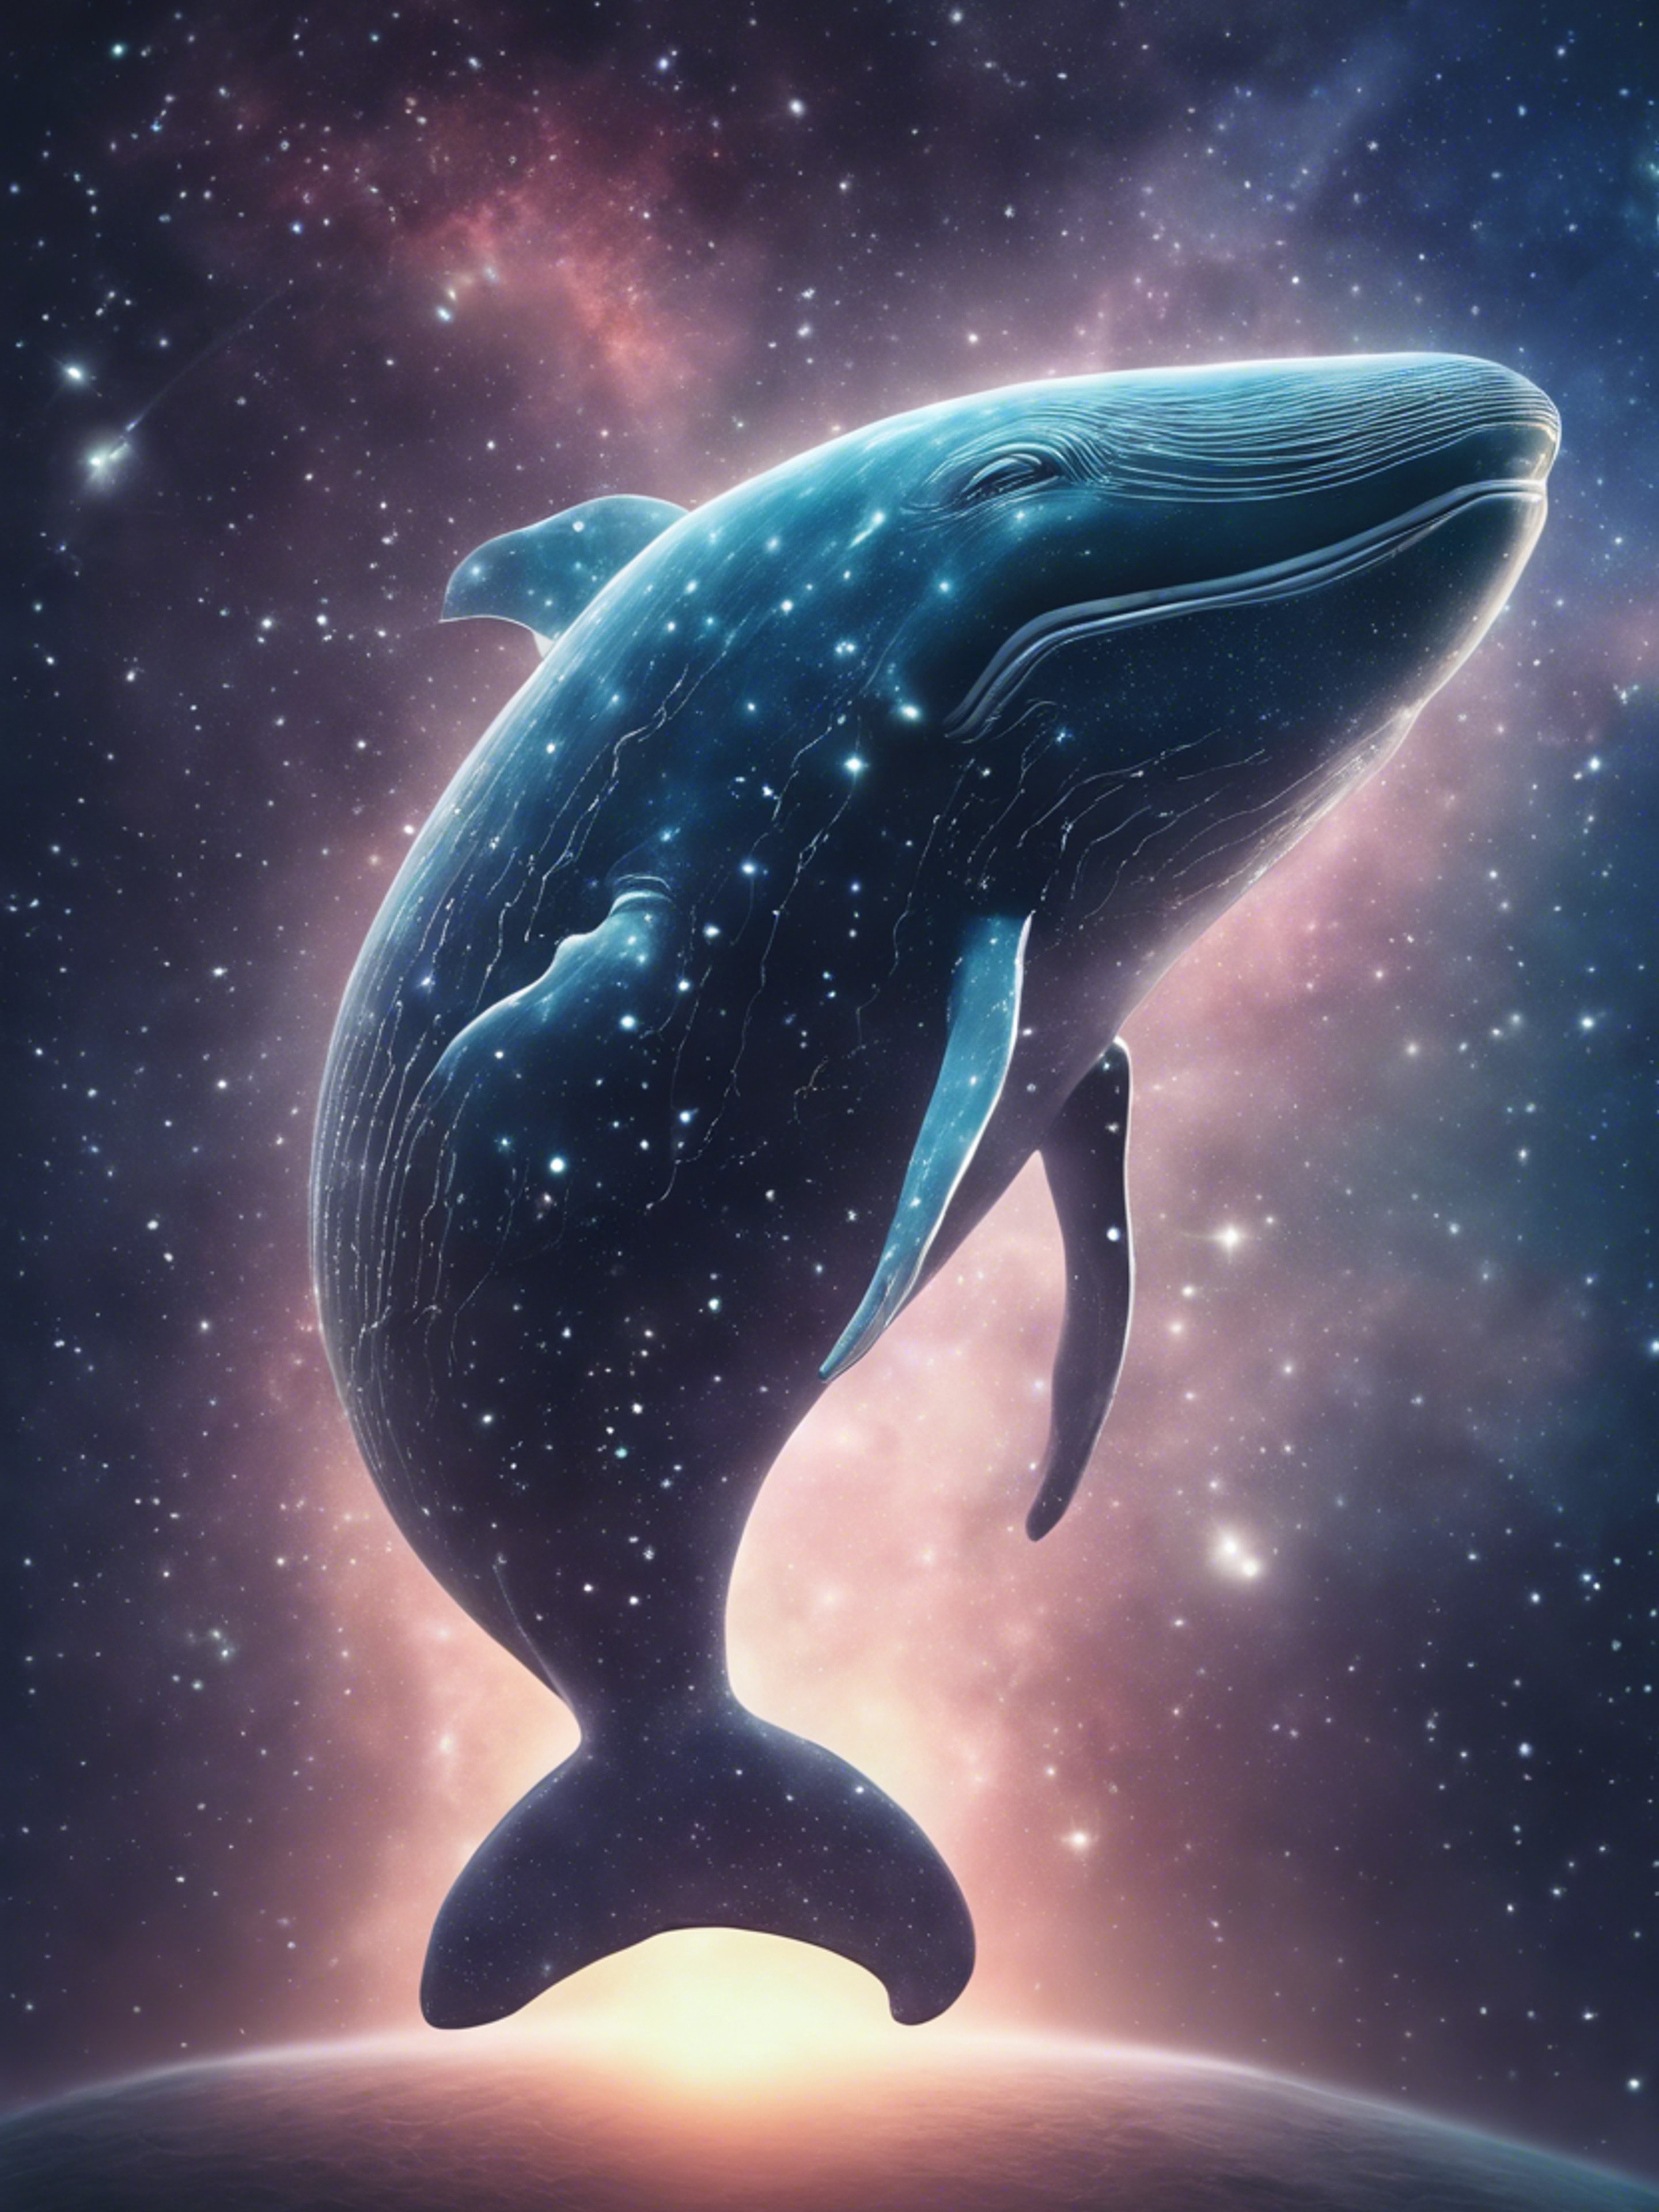 The ethereal vision of a translucent ghost whale, drifting solemnly in outer space amidst stars and galaxies.壁紙[2bf522f4d87b43c8a67e]